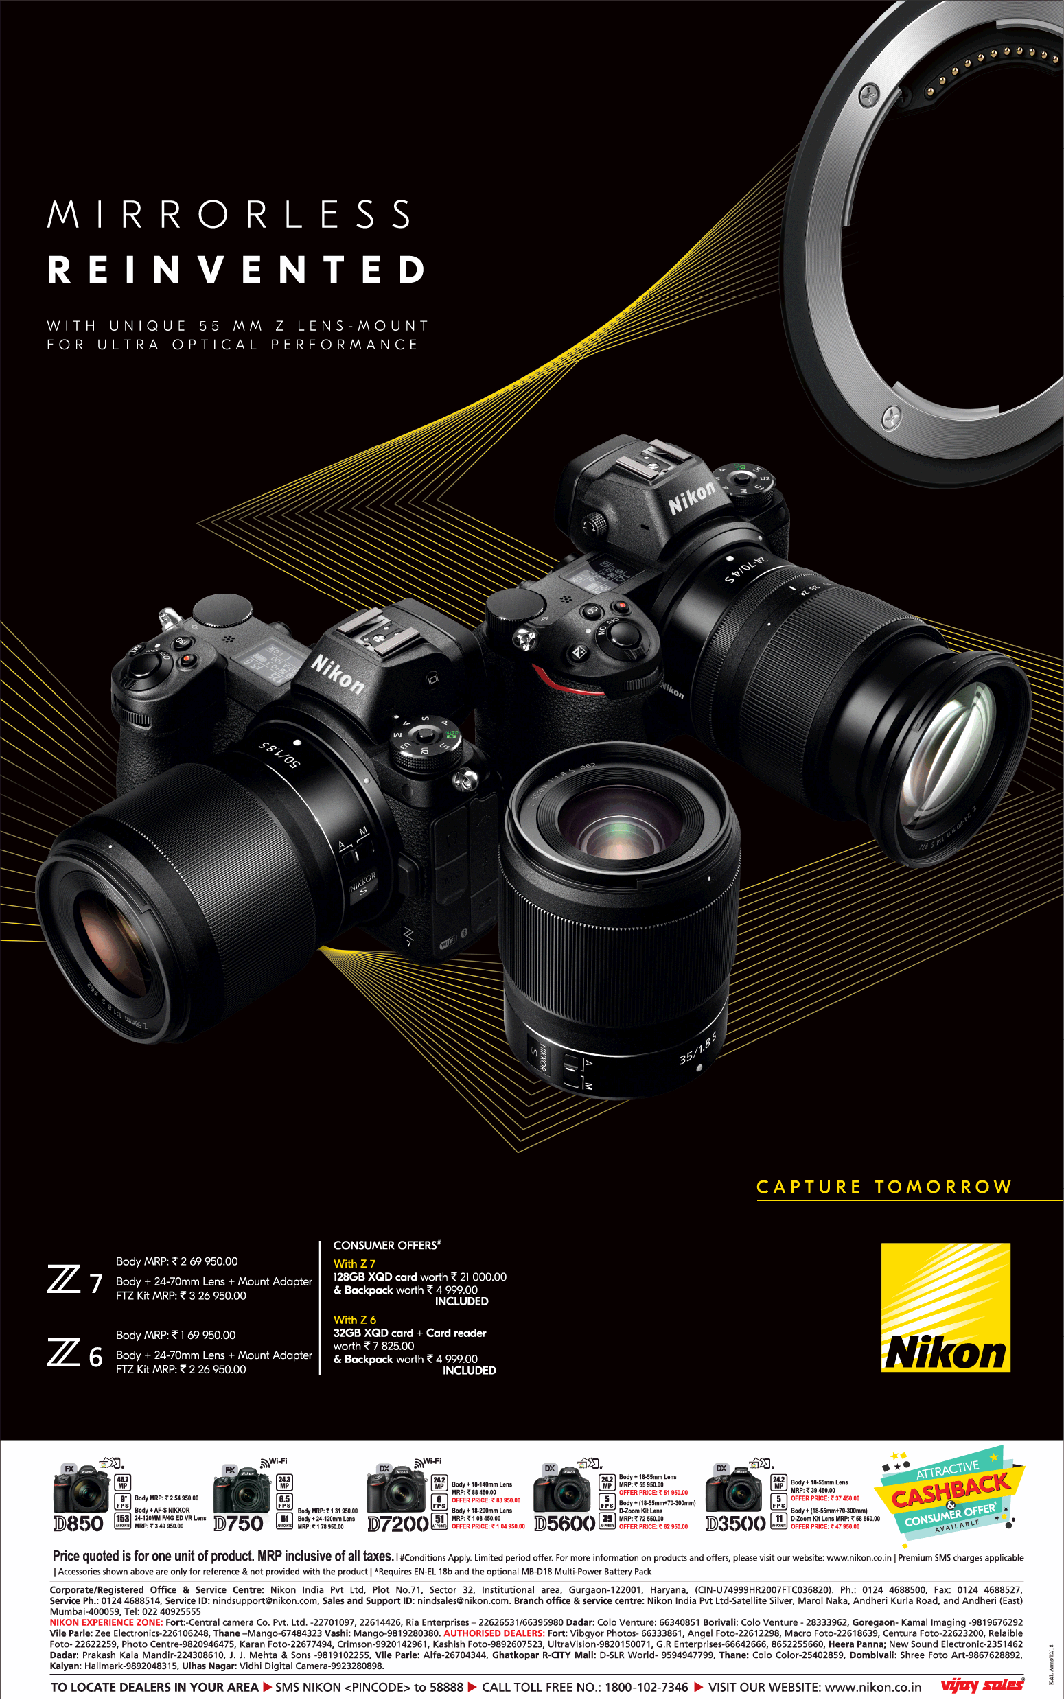 nikon-cameras-mirrorless-reinvented-capture-tomorrow-ad-bombay-times-29-12-2018.png